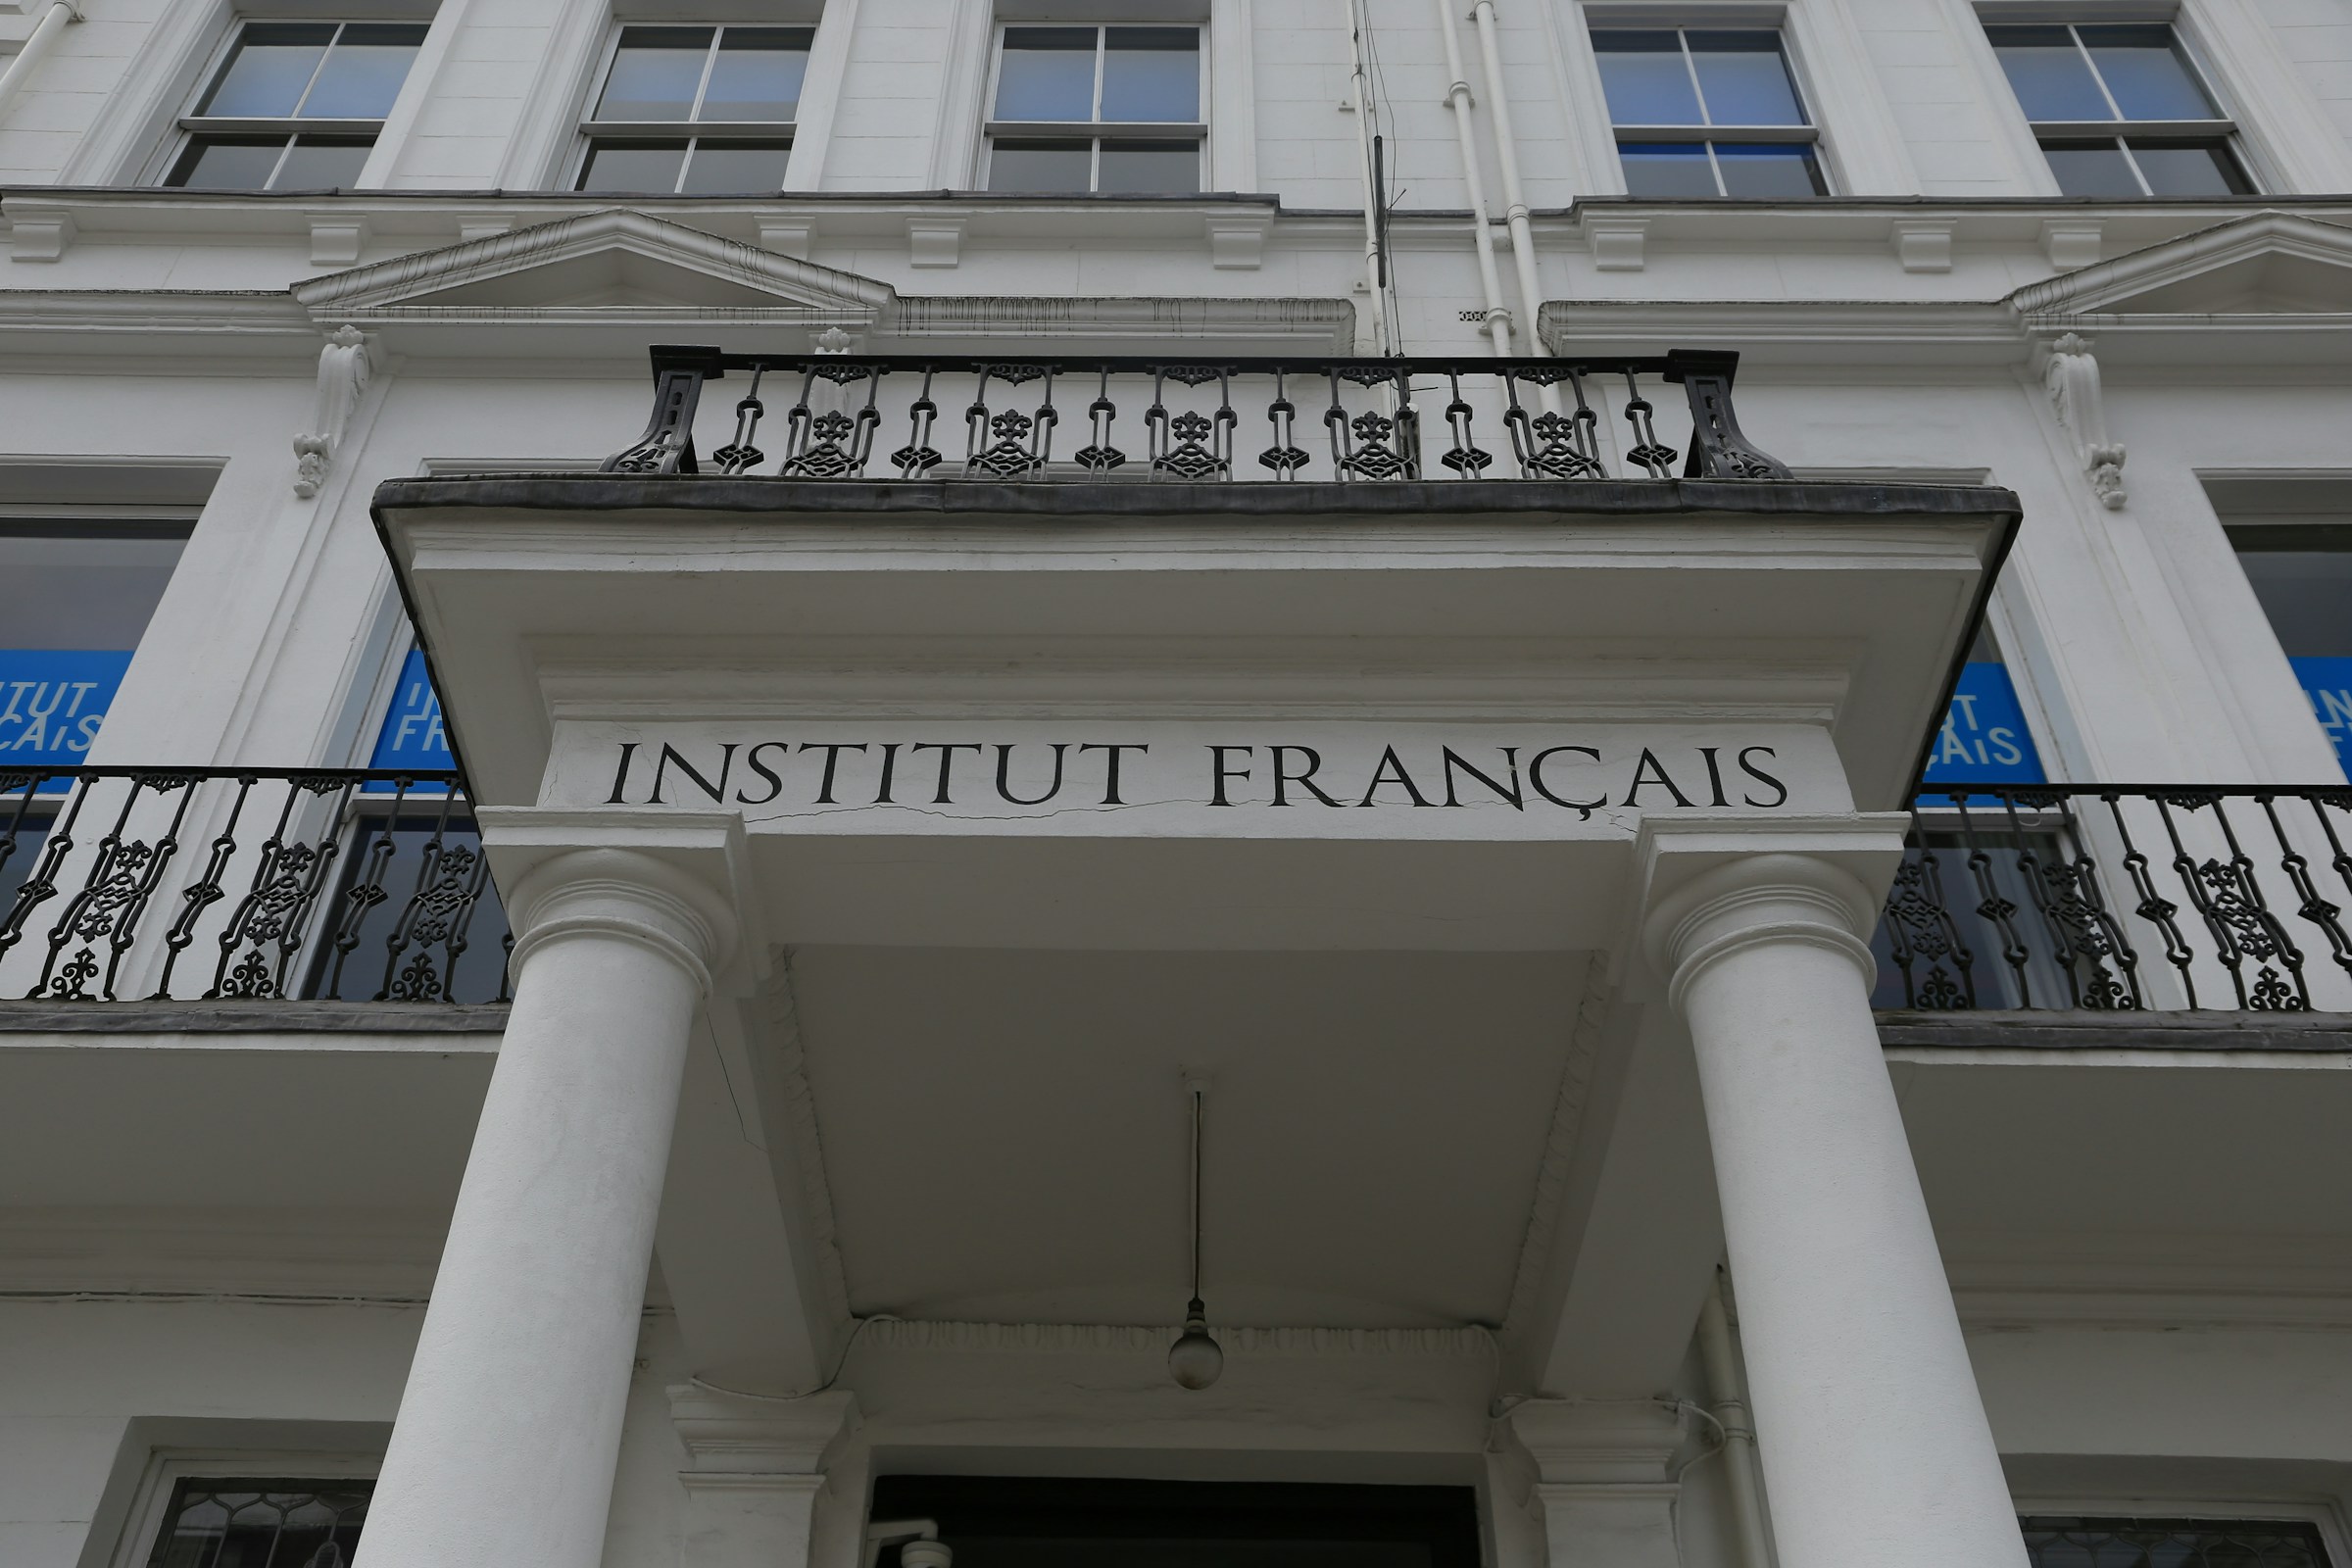 The front view of a French learning institution | Source: Unsplash